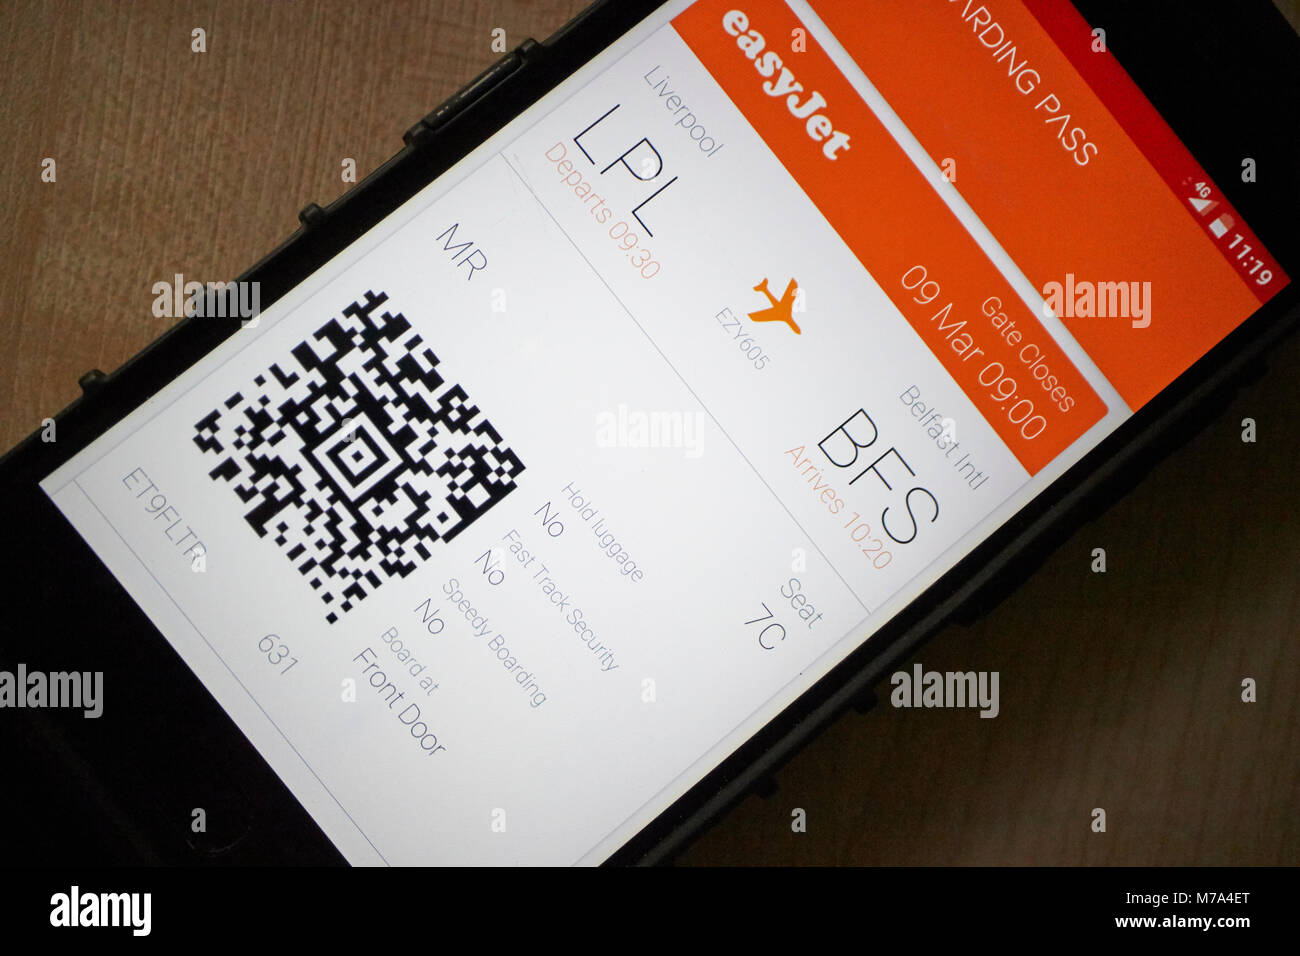 electronic boarding pass using the easyjet app on a smartphone Stock Photo